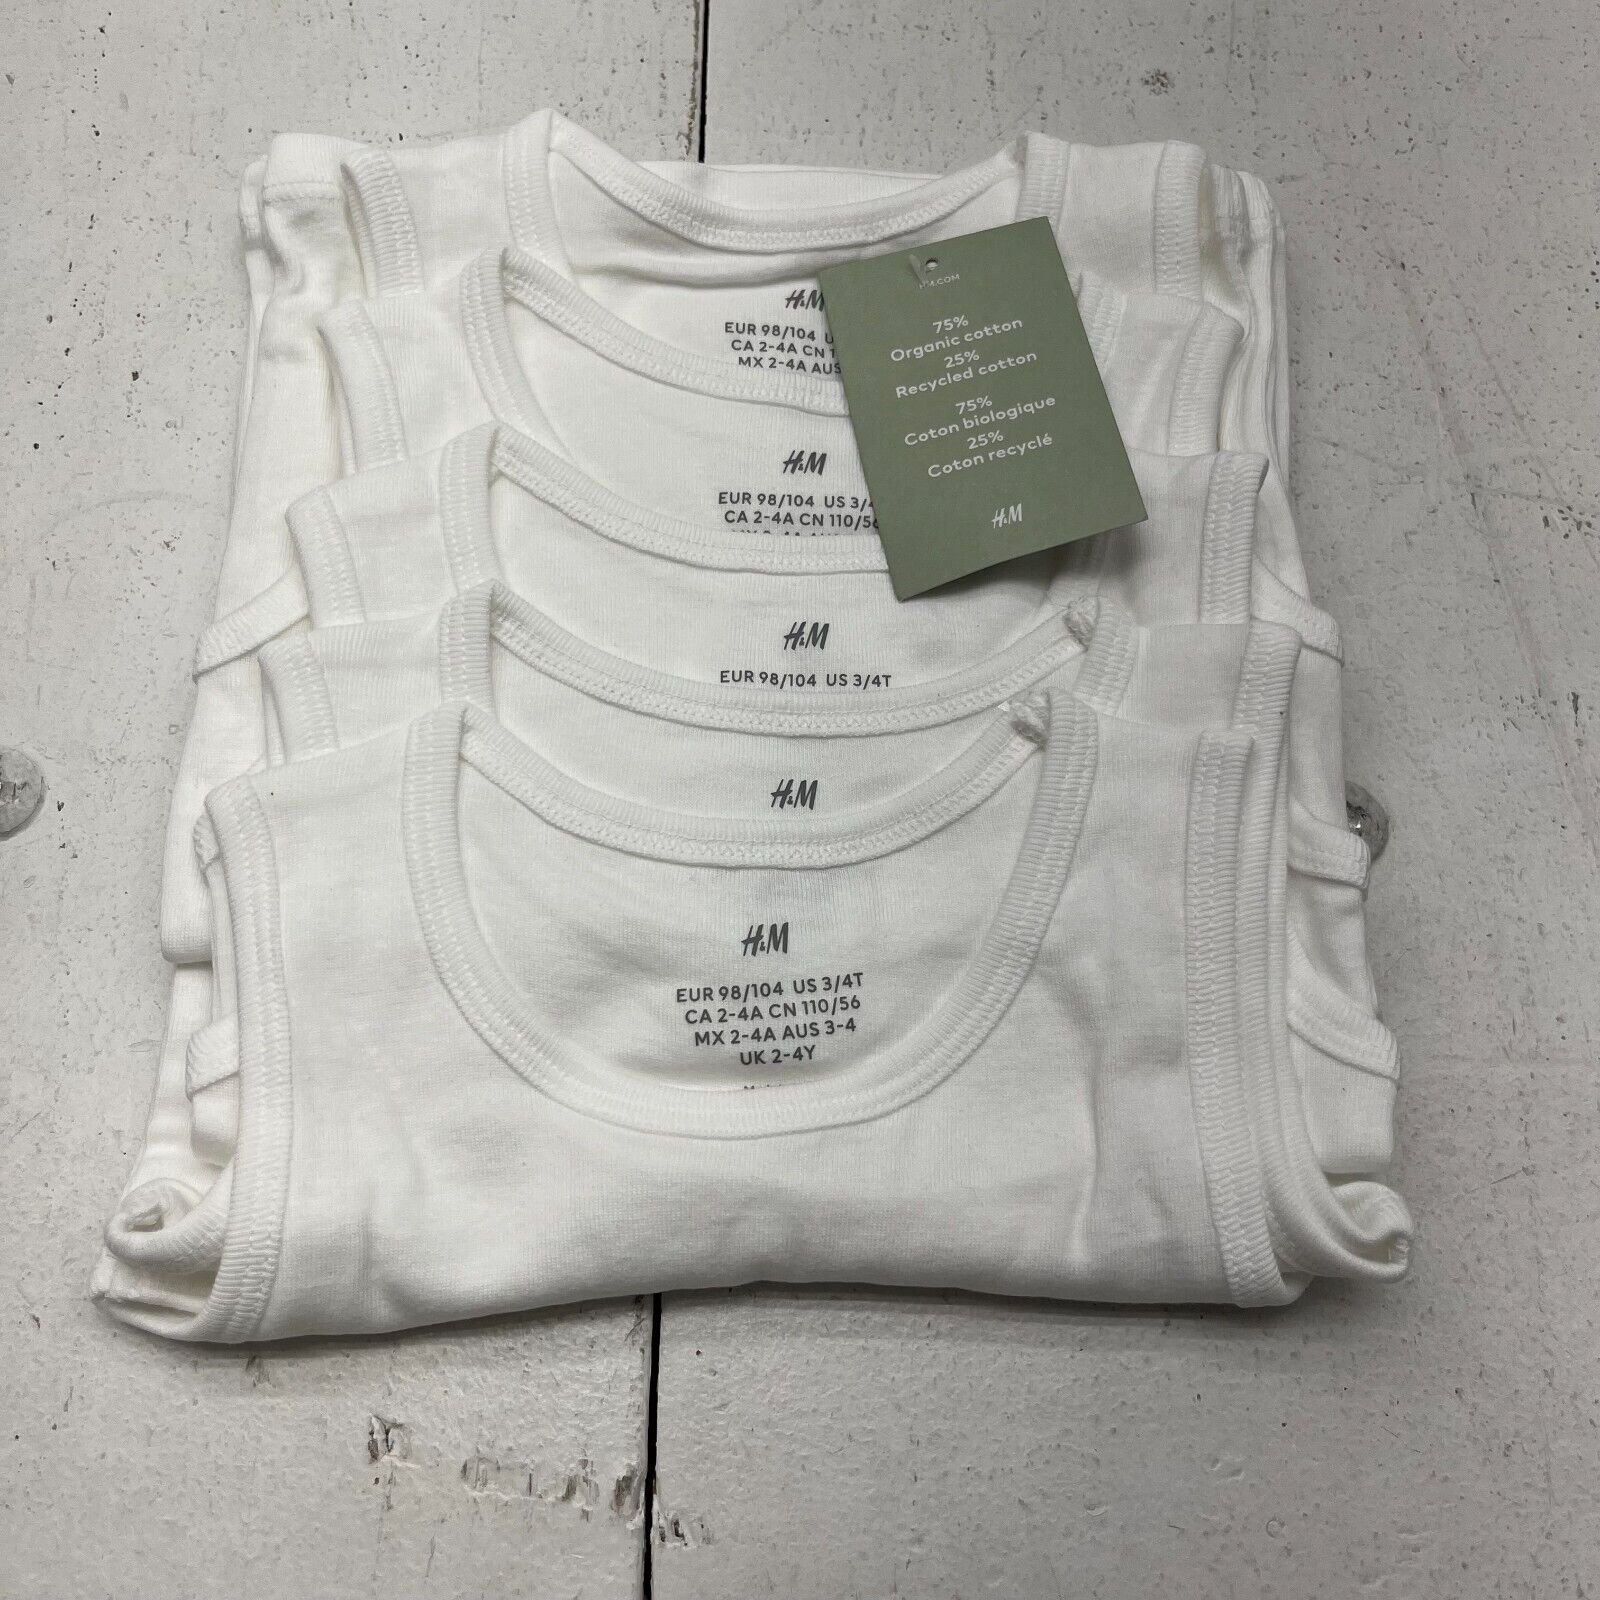 Boys - White 3-Pack T-shirts - Size: 12/14 (10-12Y) - H&M